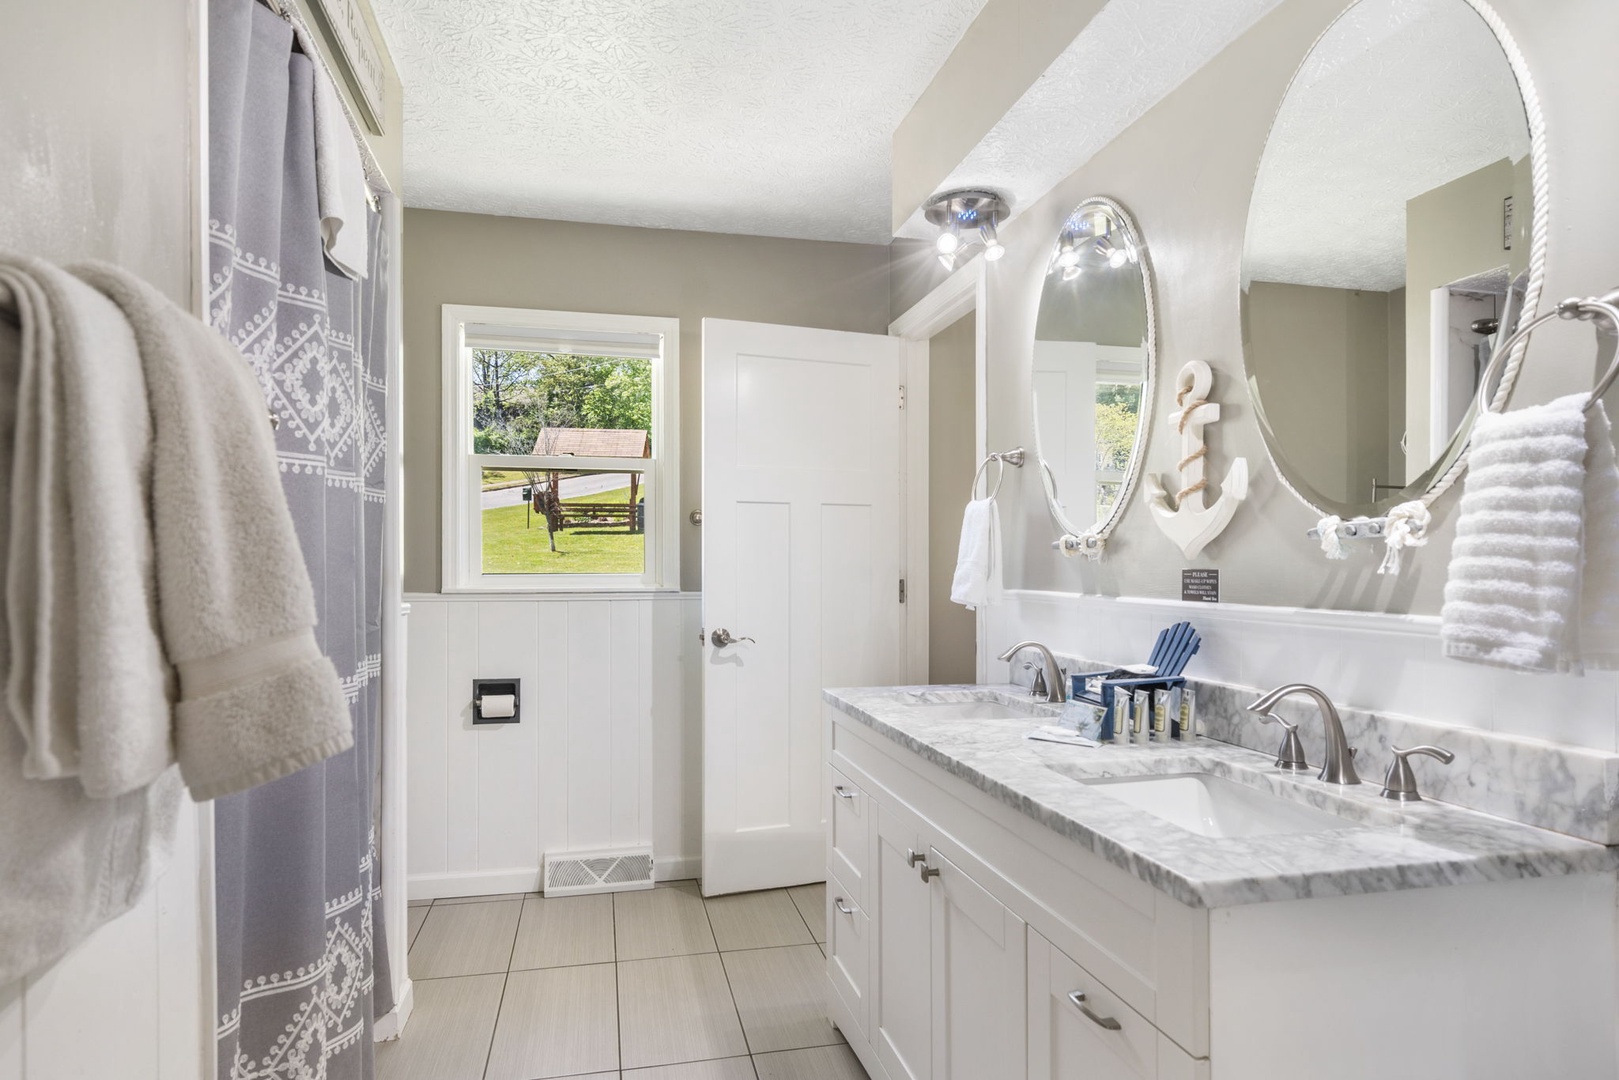 The king en suite bathroom offers a double vanity & shower/tub combo